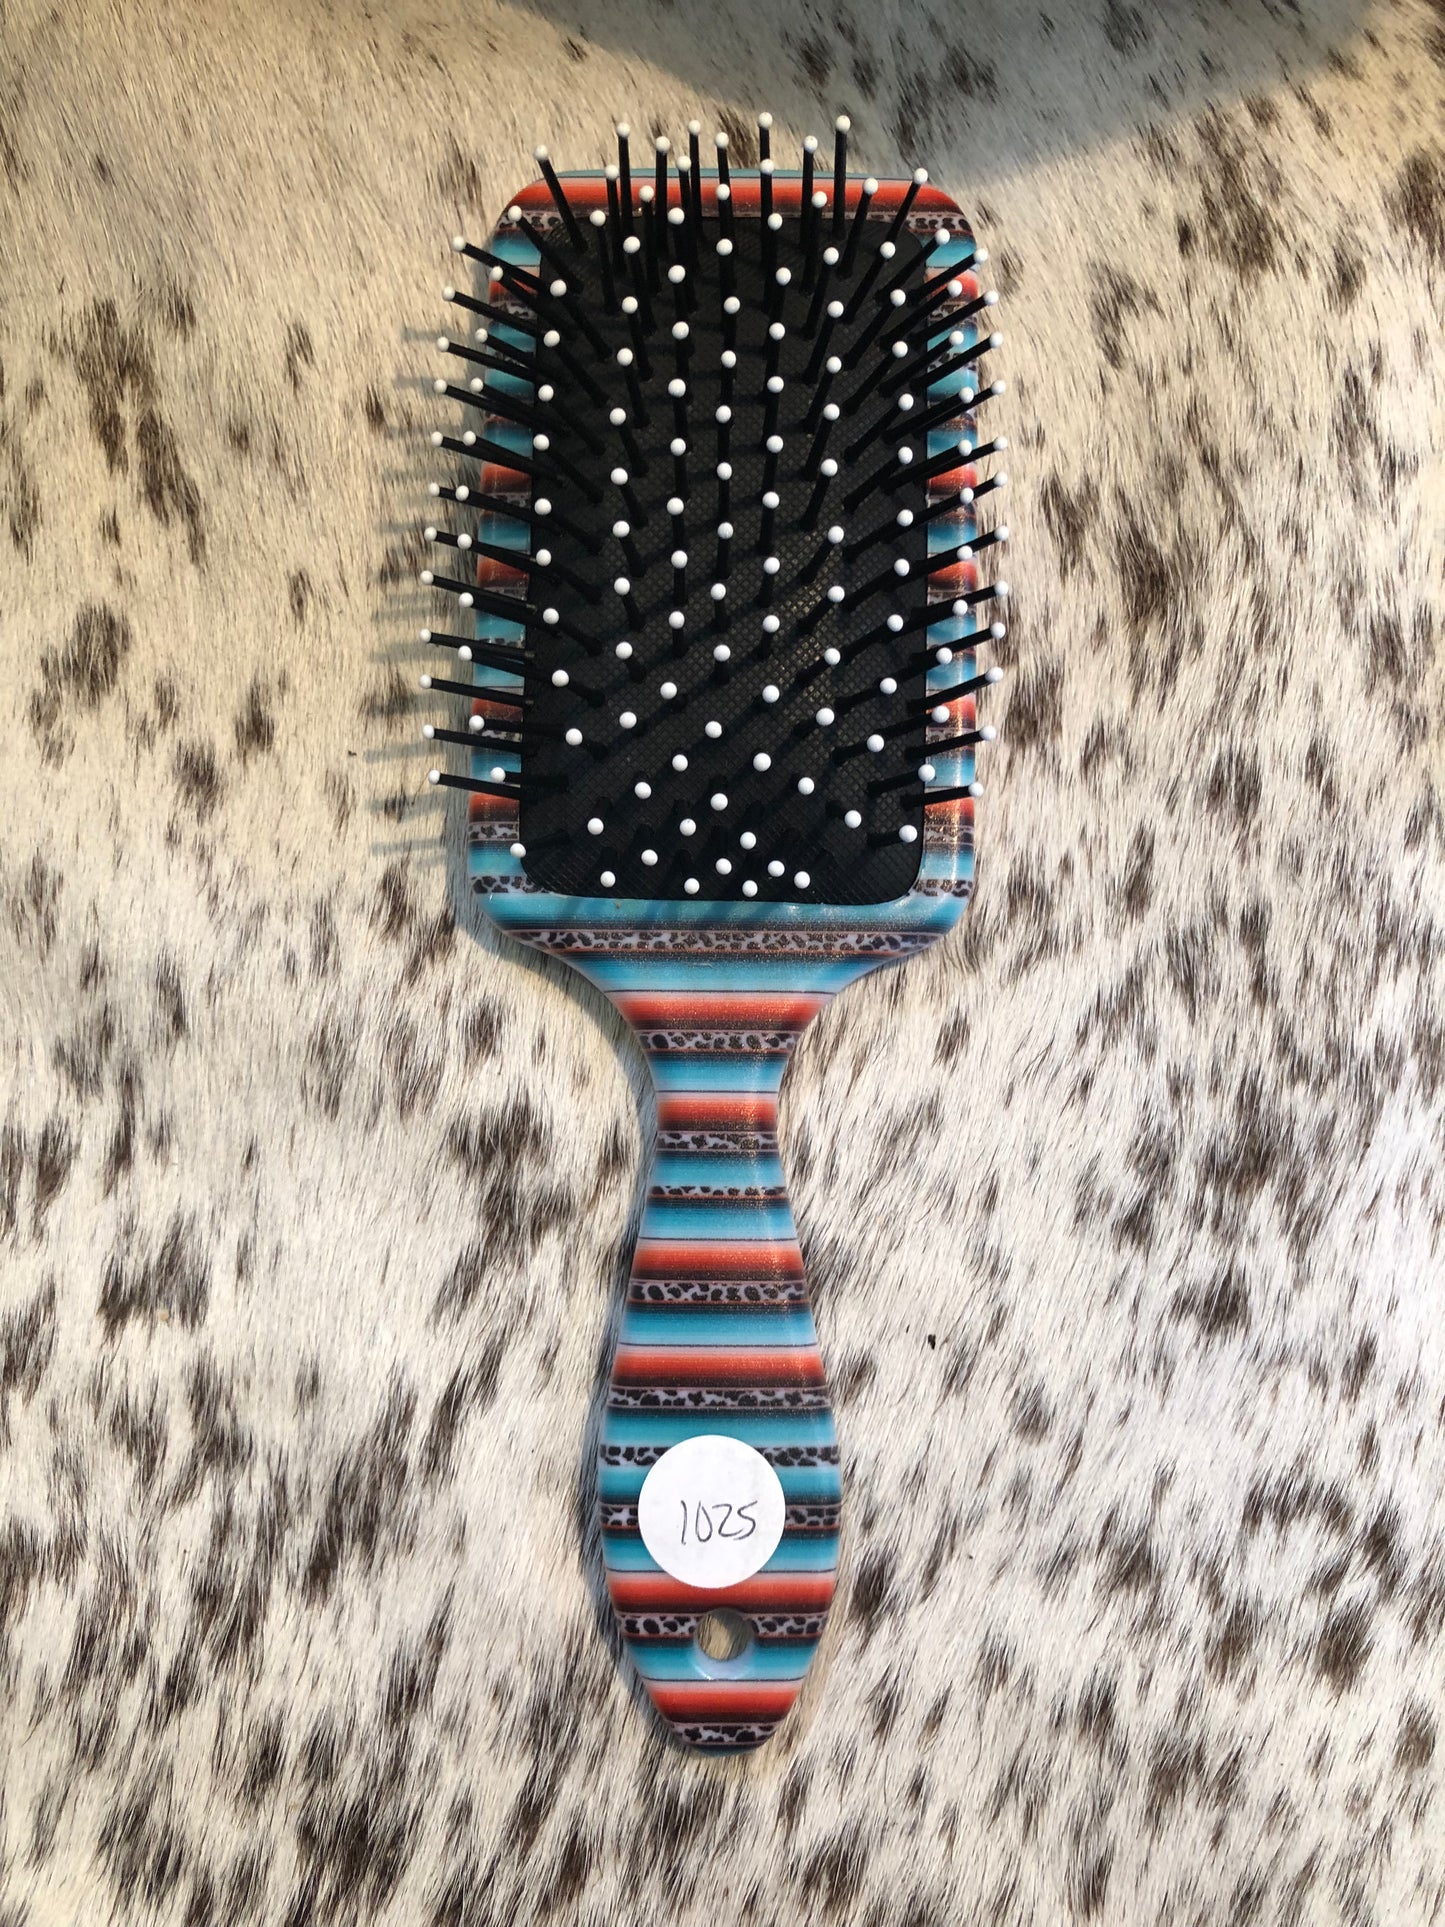 Western tooled leather floral and turquoise butterfly patch on serape print paddle brush